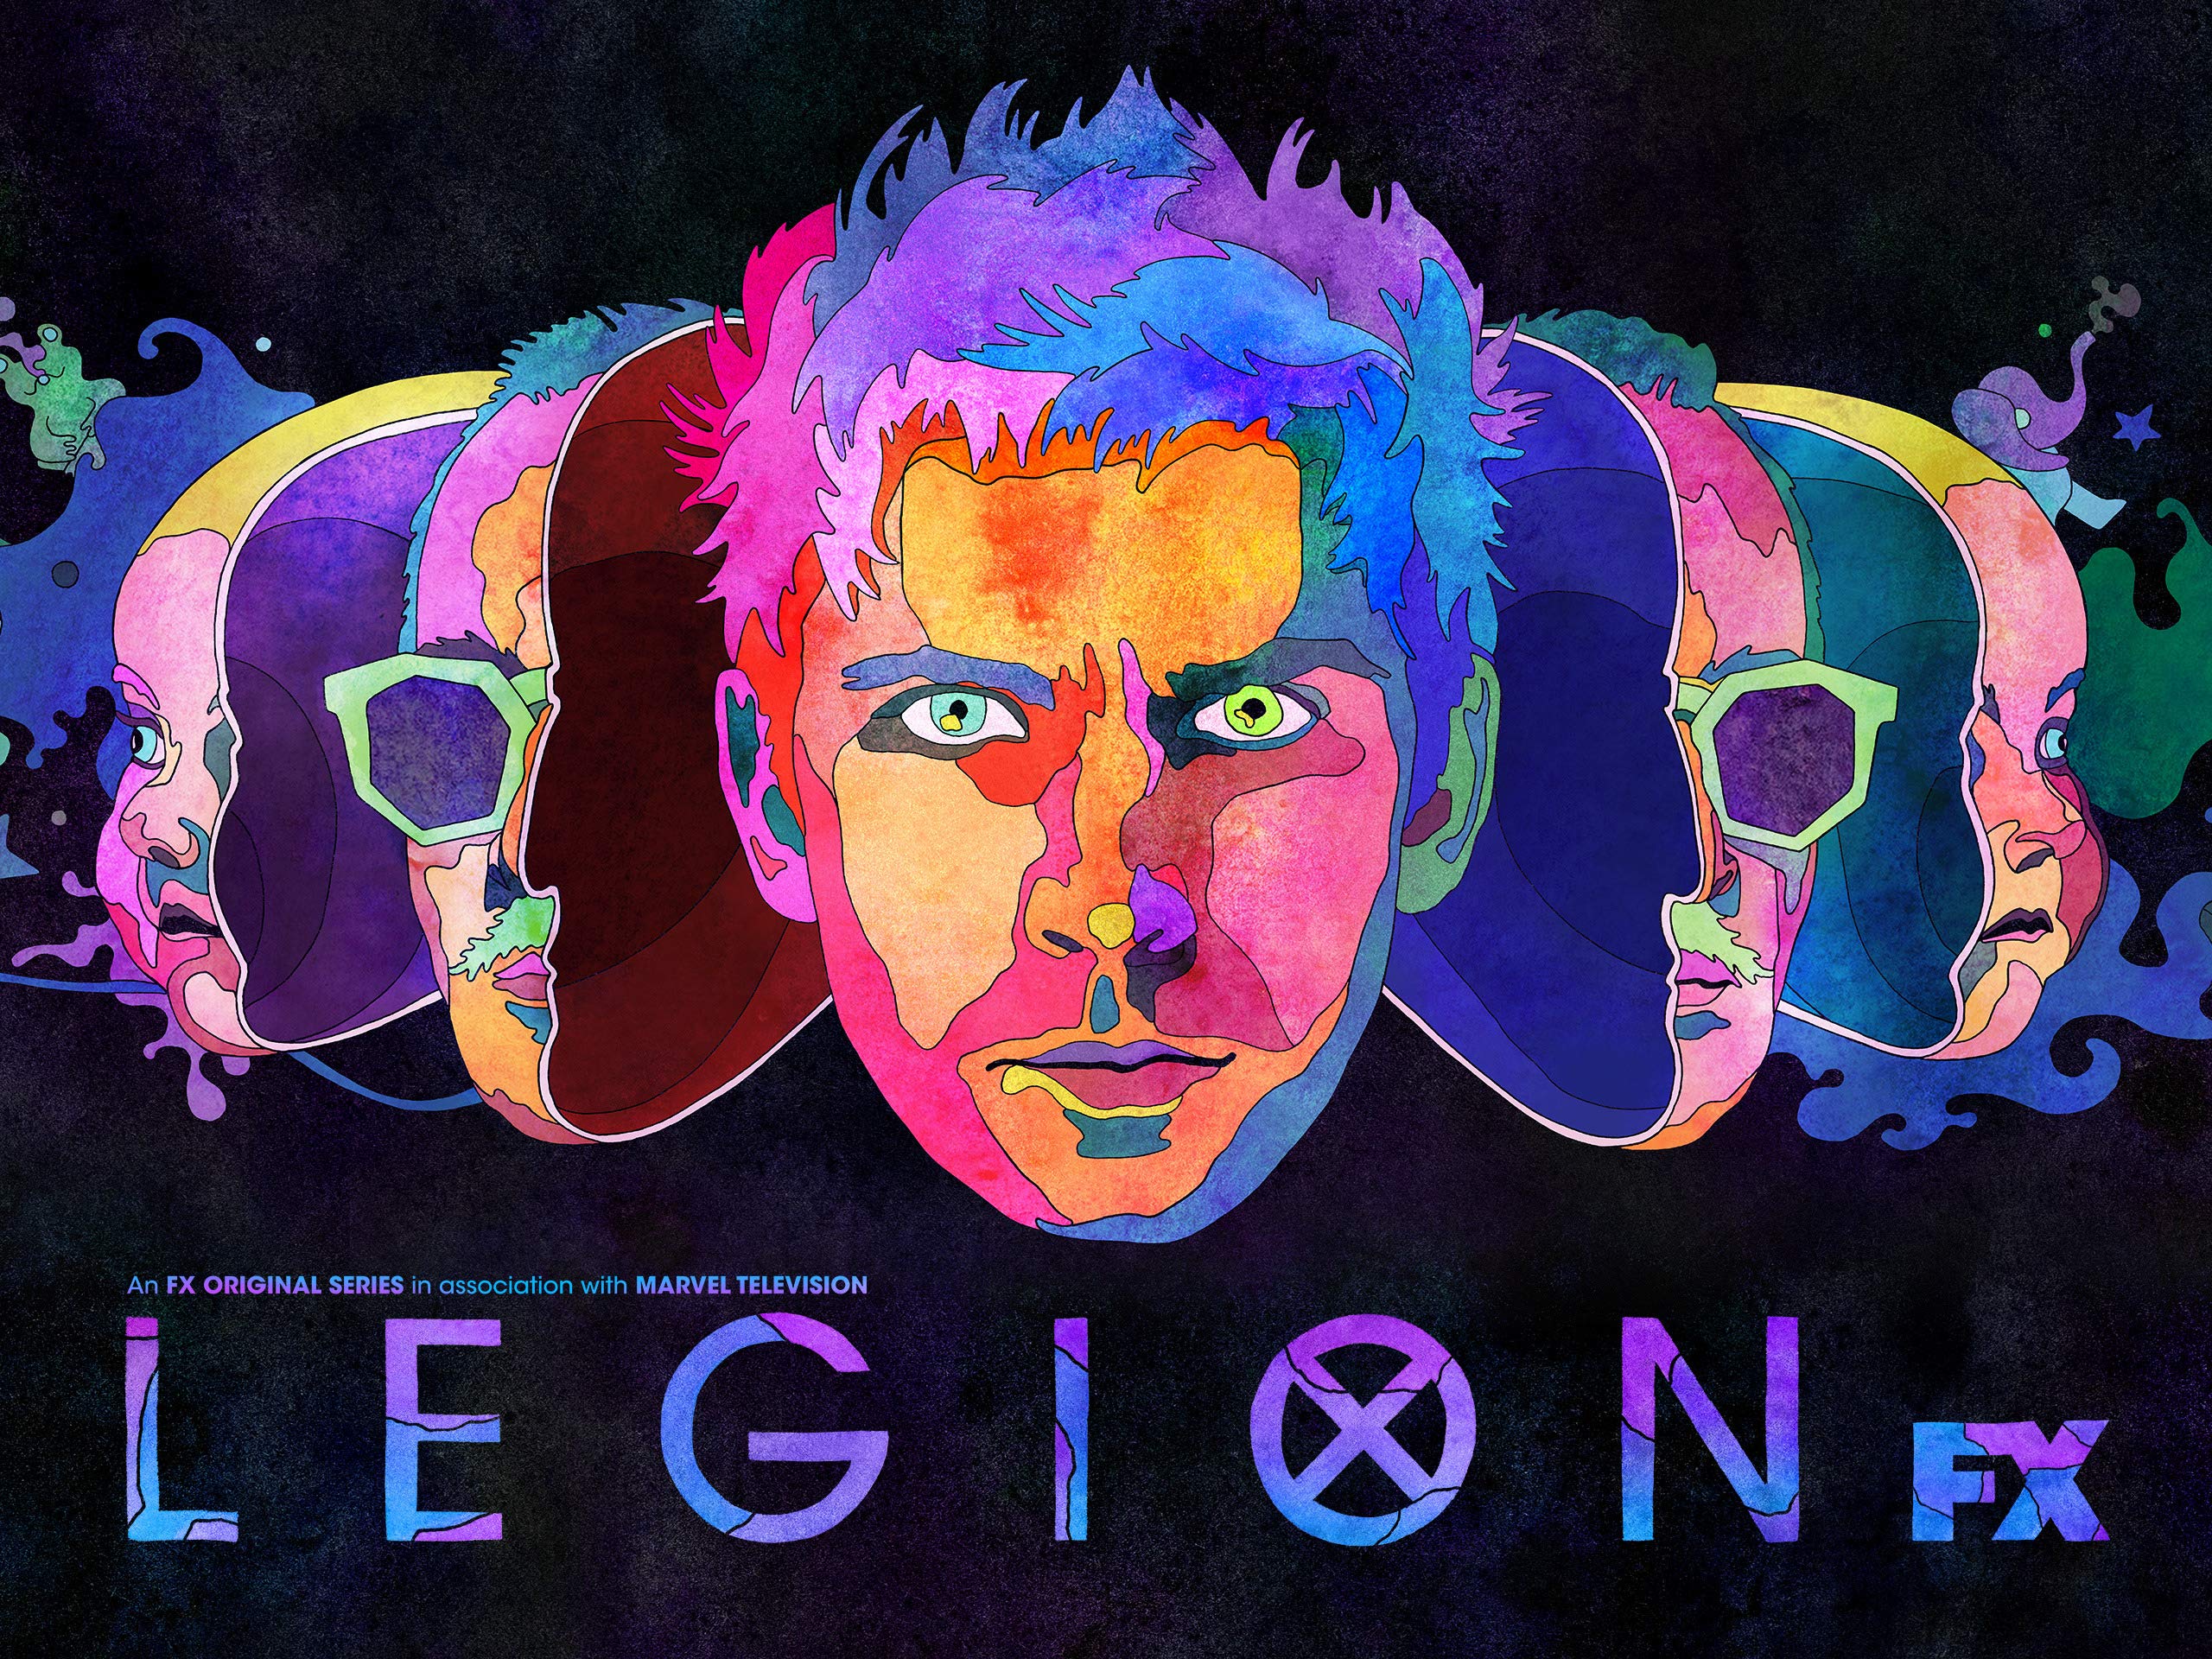 A promotional image for Legion, showing David's face in neon colors. ON either side of his face are abstract images depicting split versions of peoples' faces, including a mustached man and an infant. The show's name is written across the bottom of the page in blue. (Photo by FX and Marvel.)